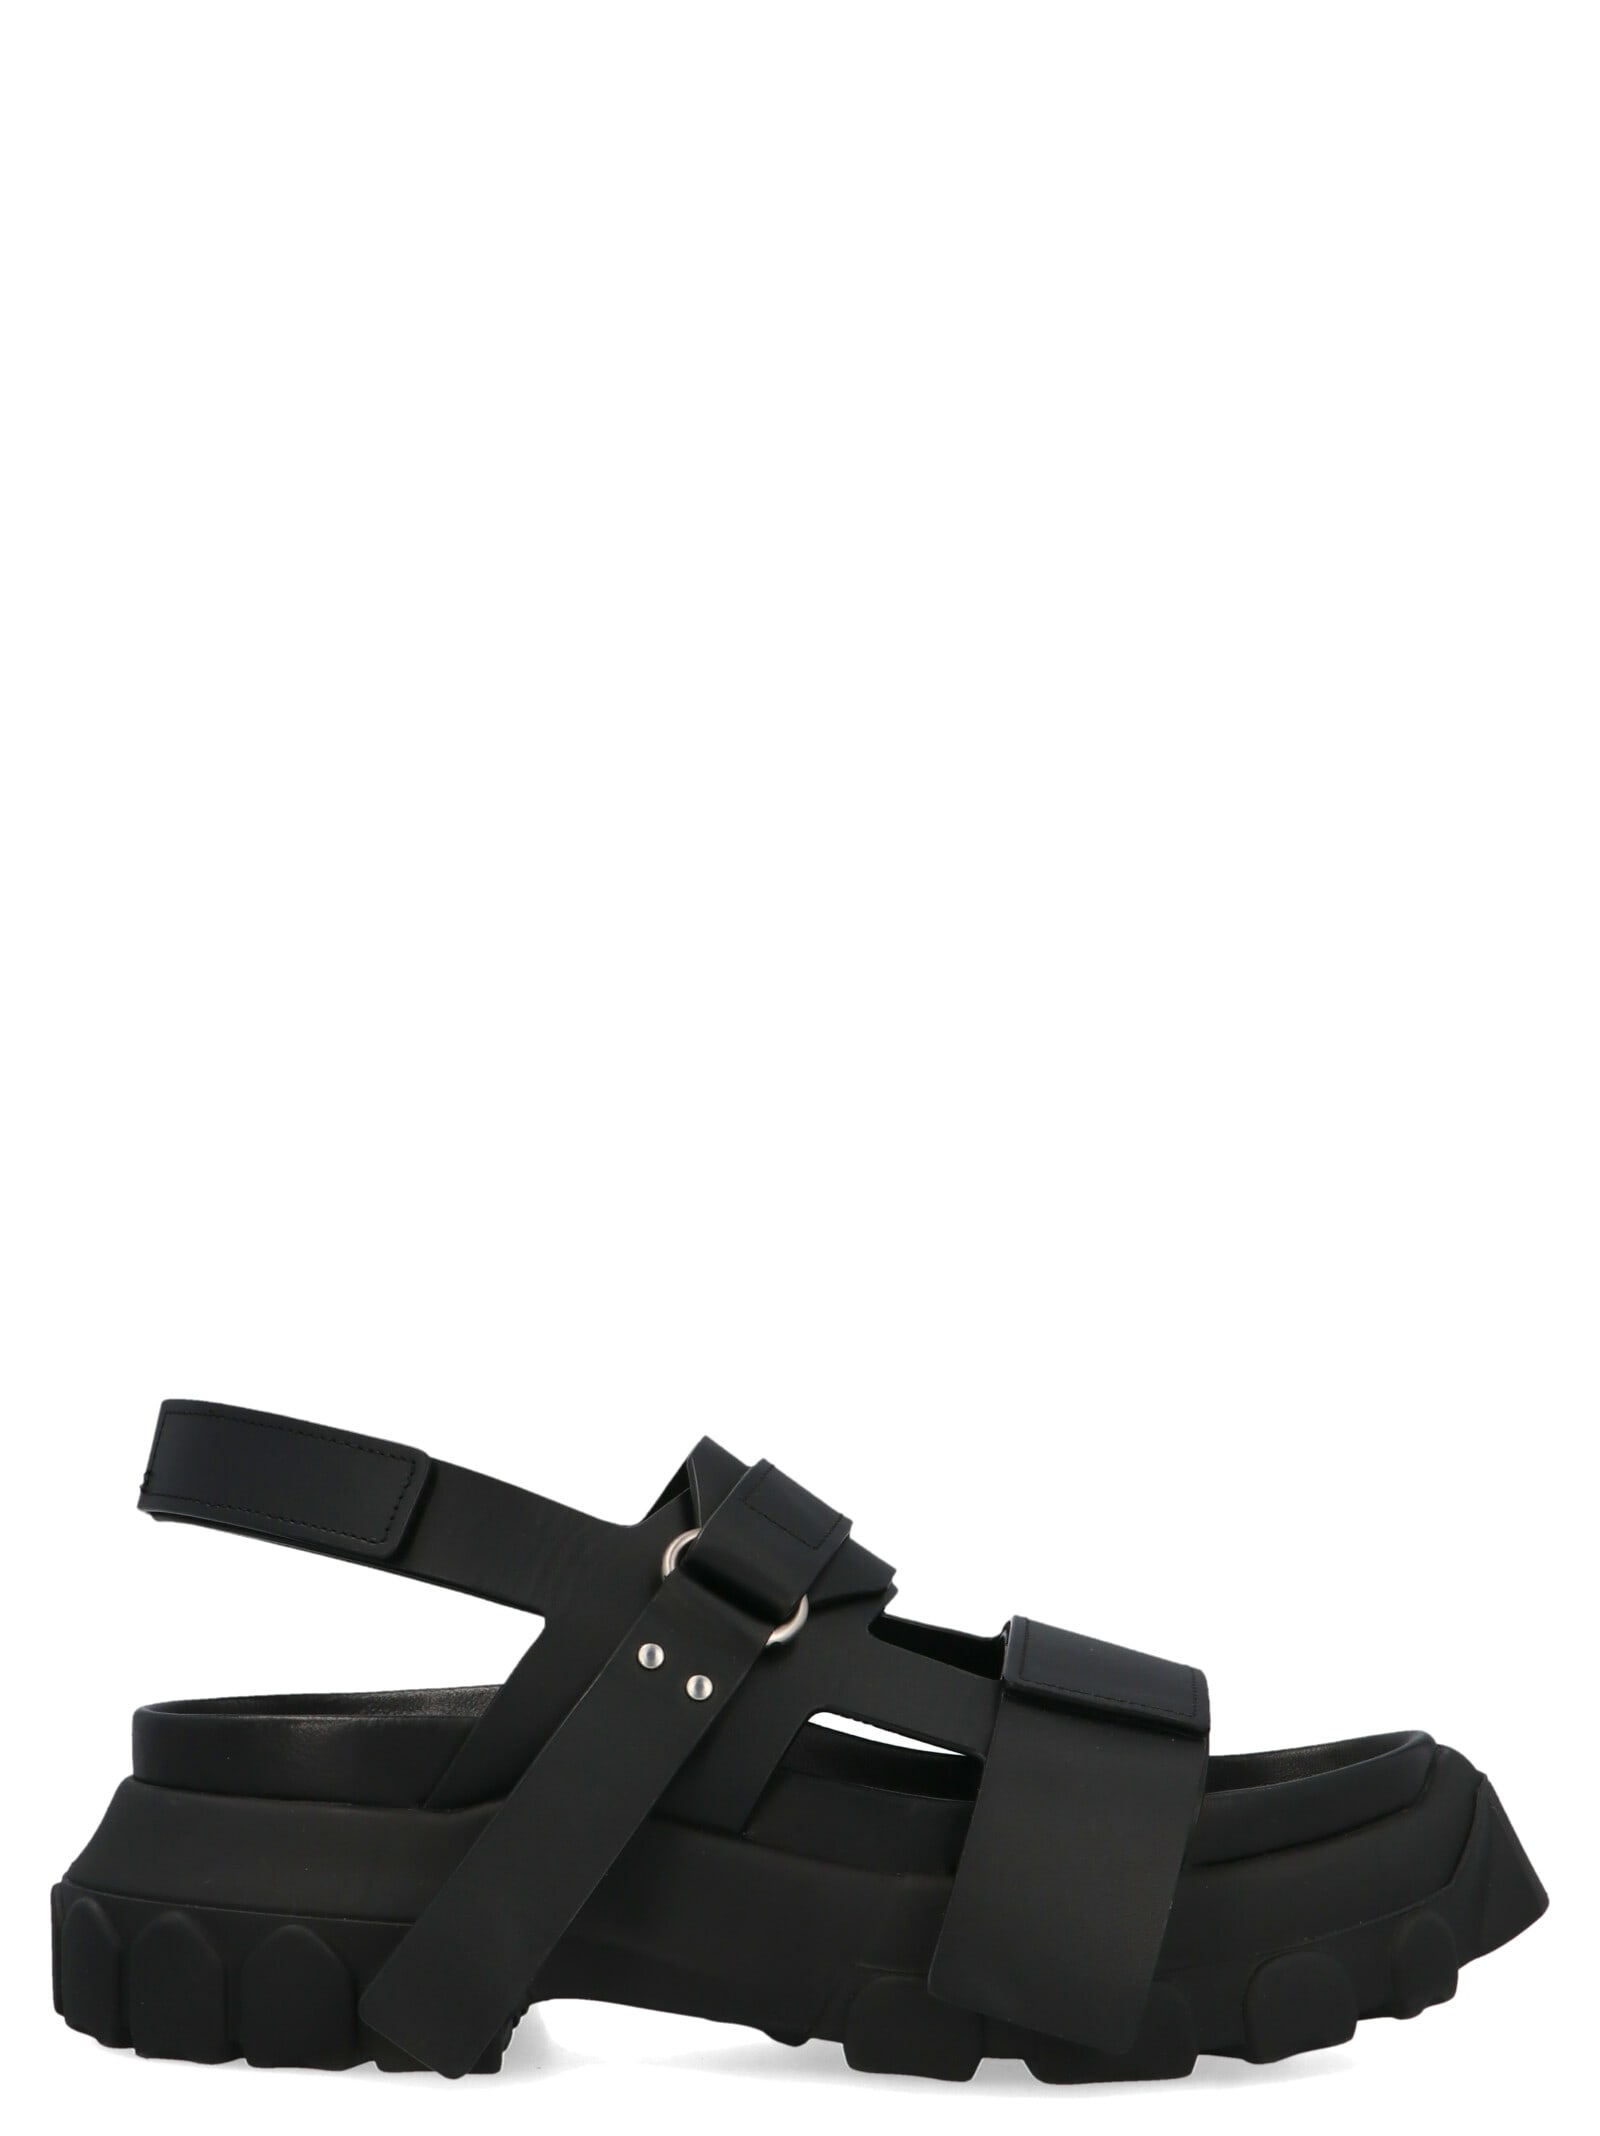 RICK OWENS TRACTOR SHOES